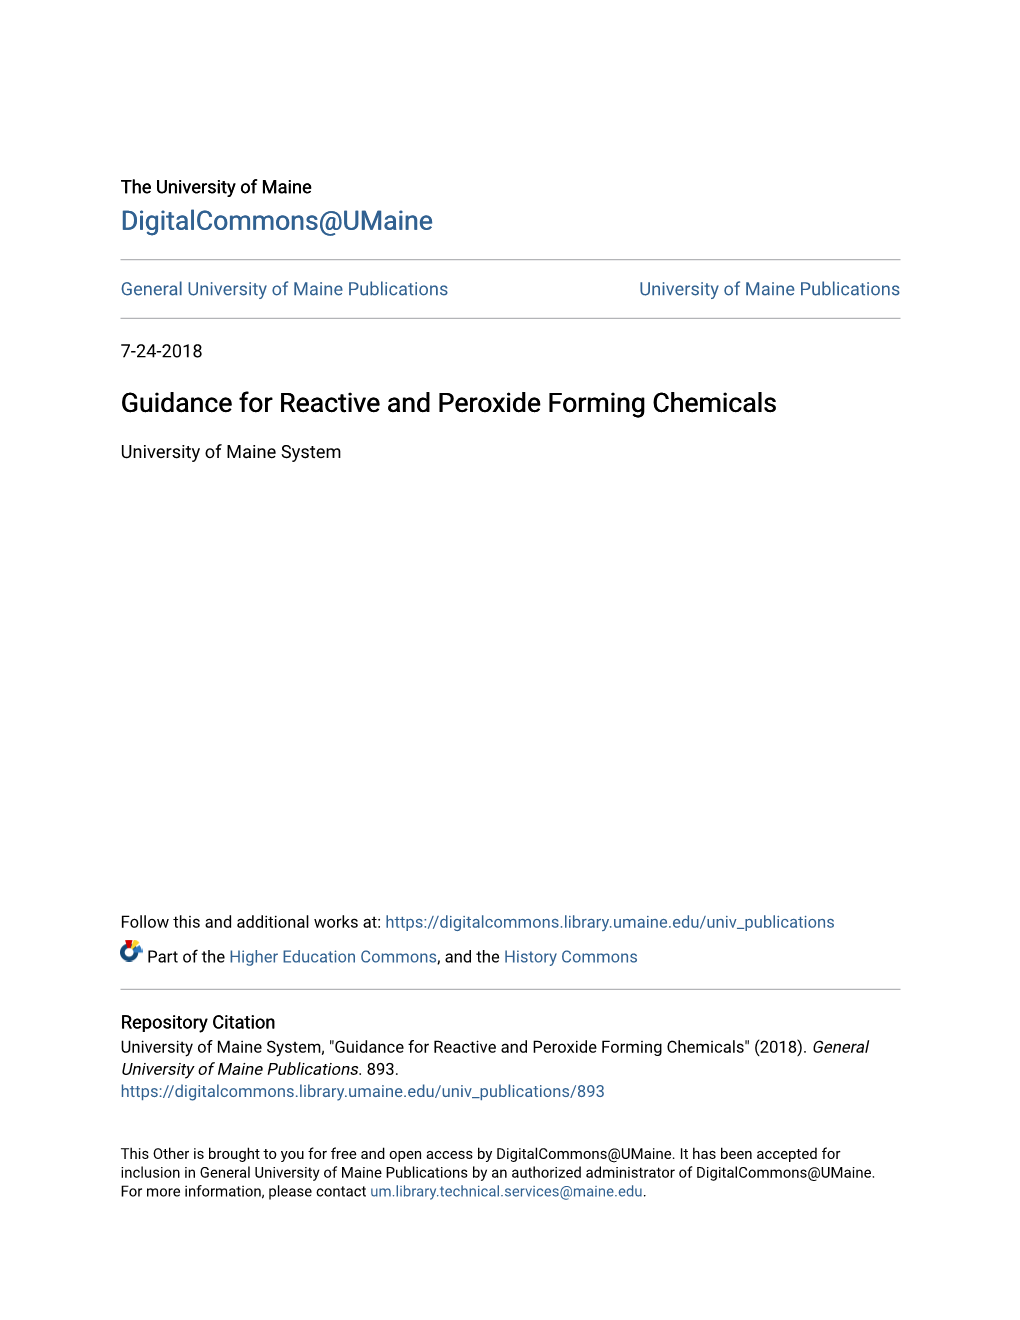 Guidance for Reactive and Peroxide Forming Chemicals